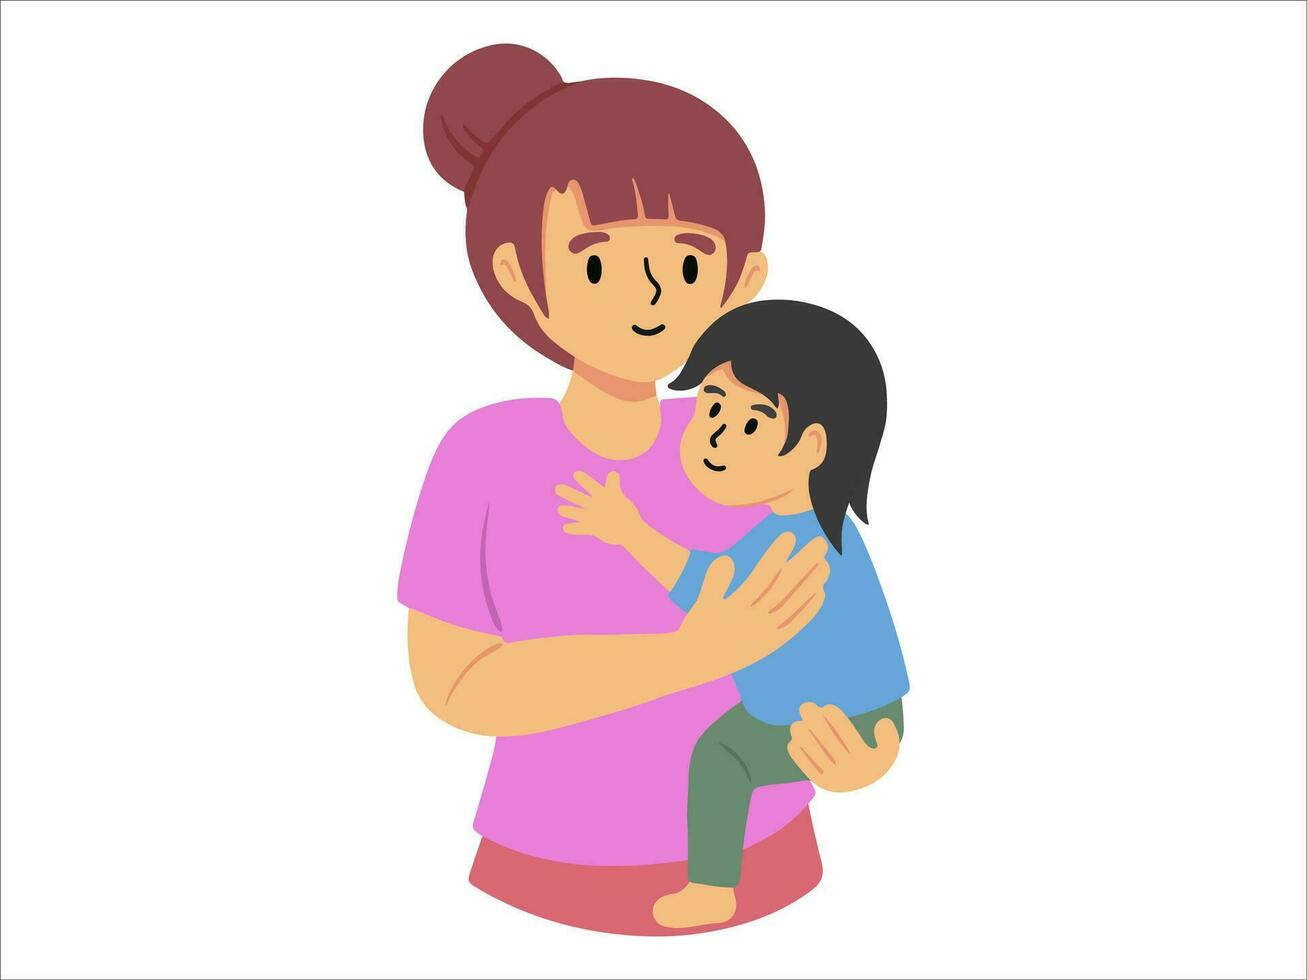 Mom holding baby or People Character illustration vector